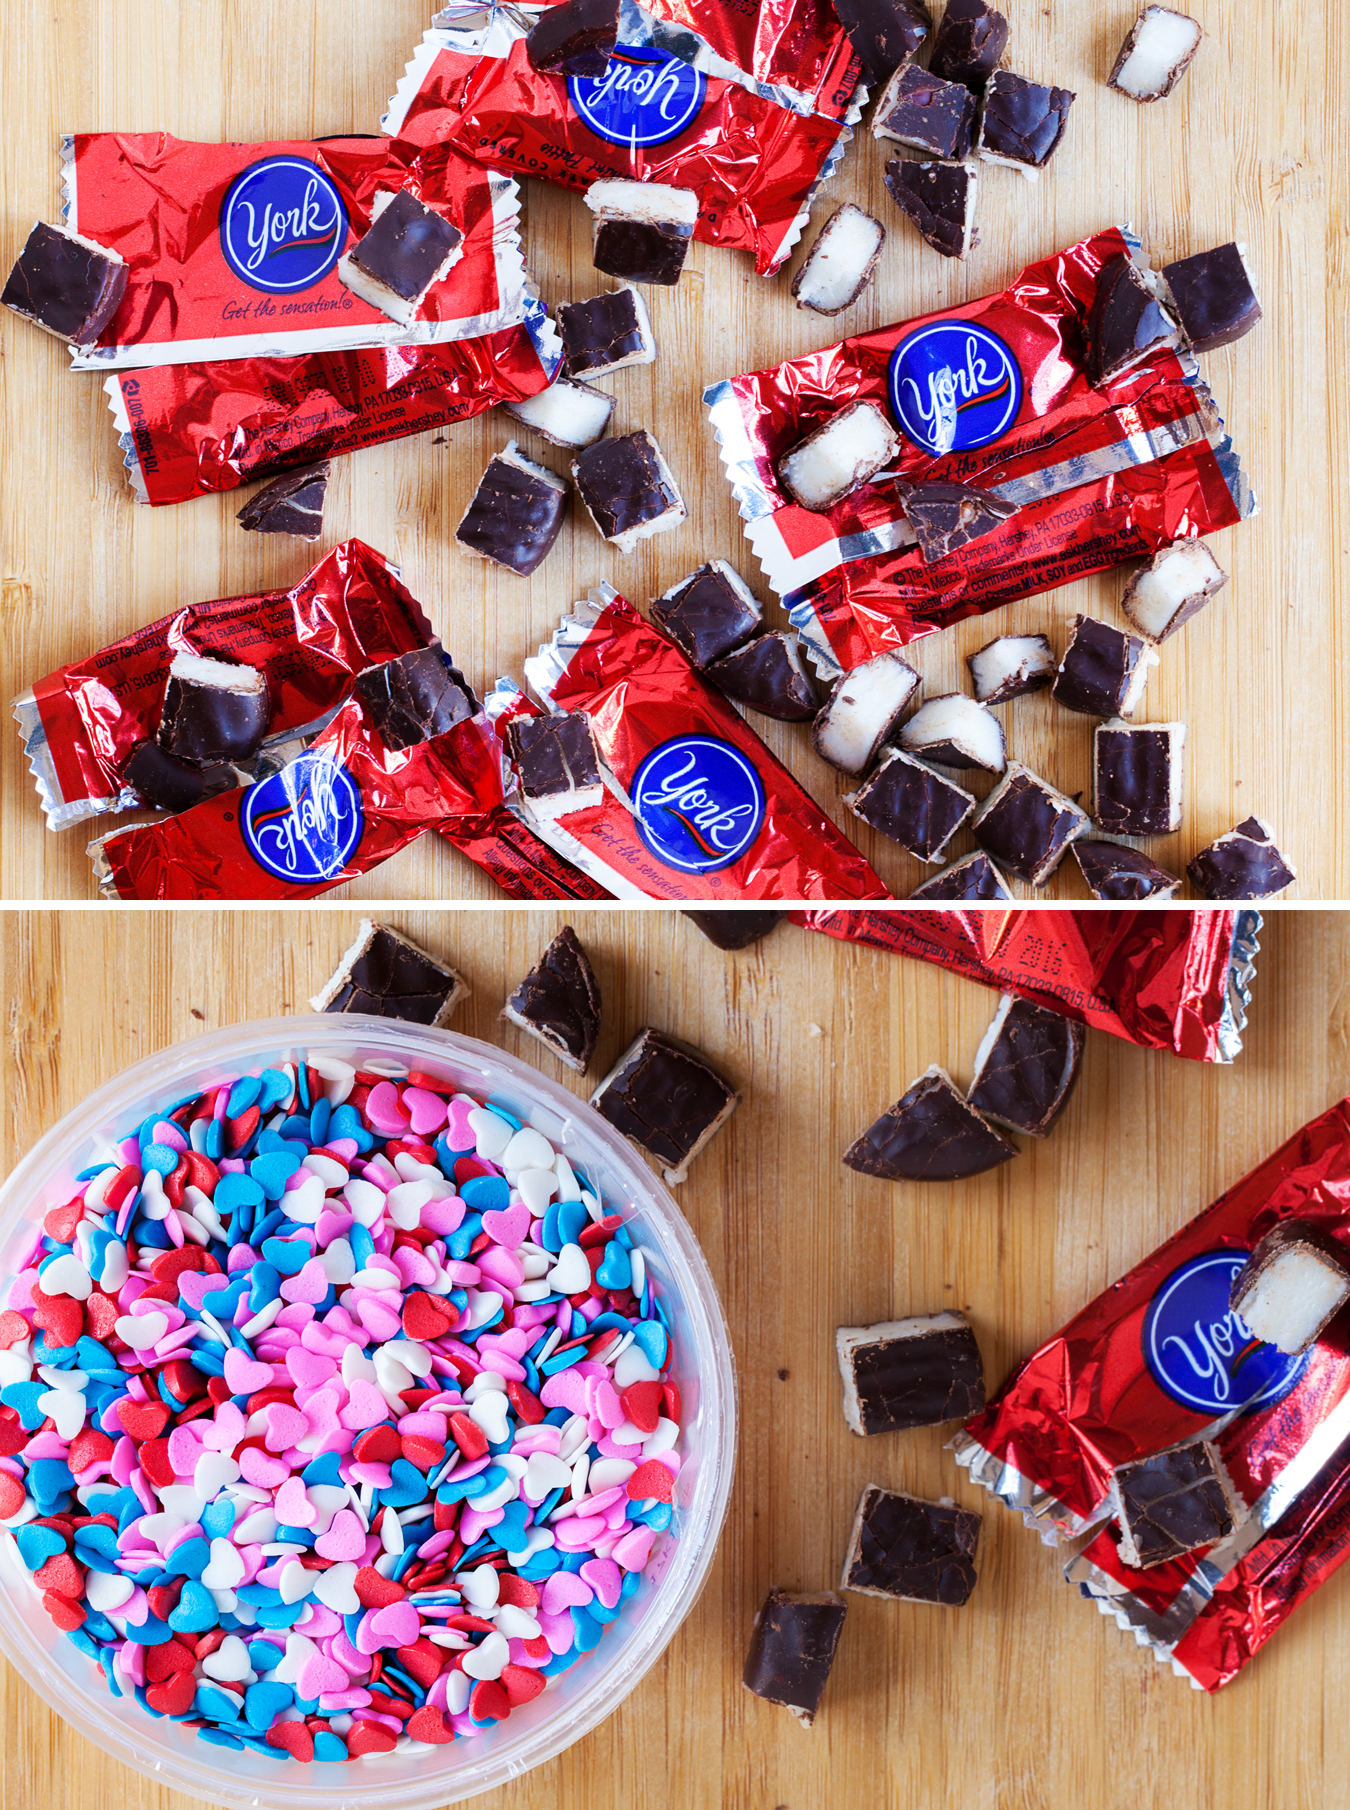 Chopped York peppermint patties and heart sprinkles.